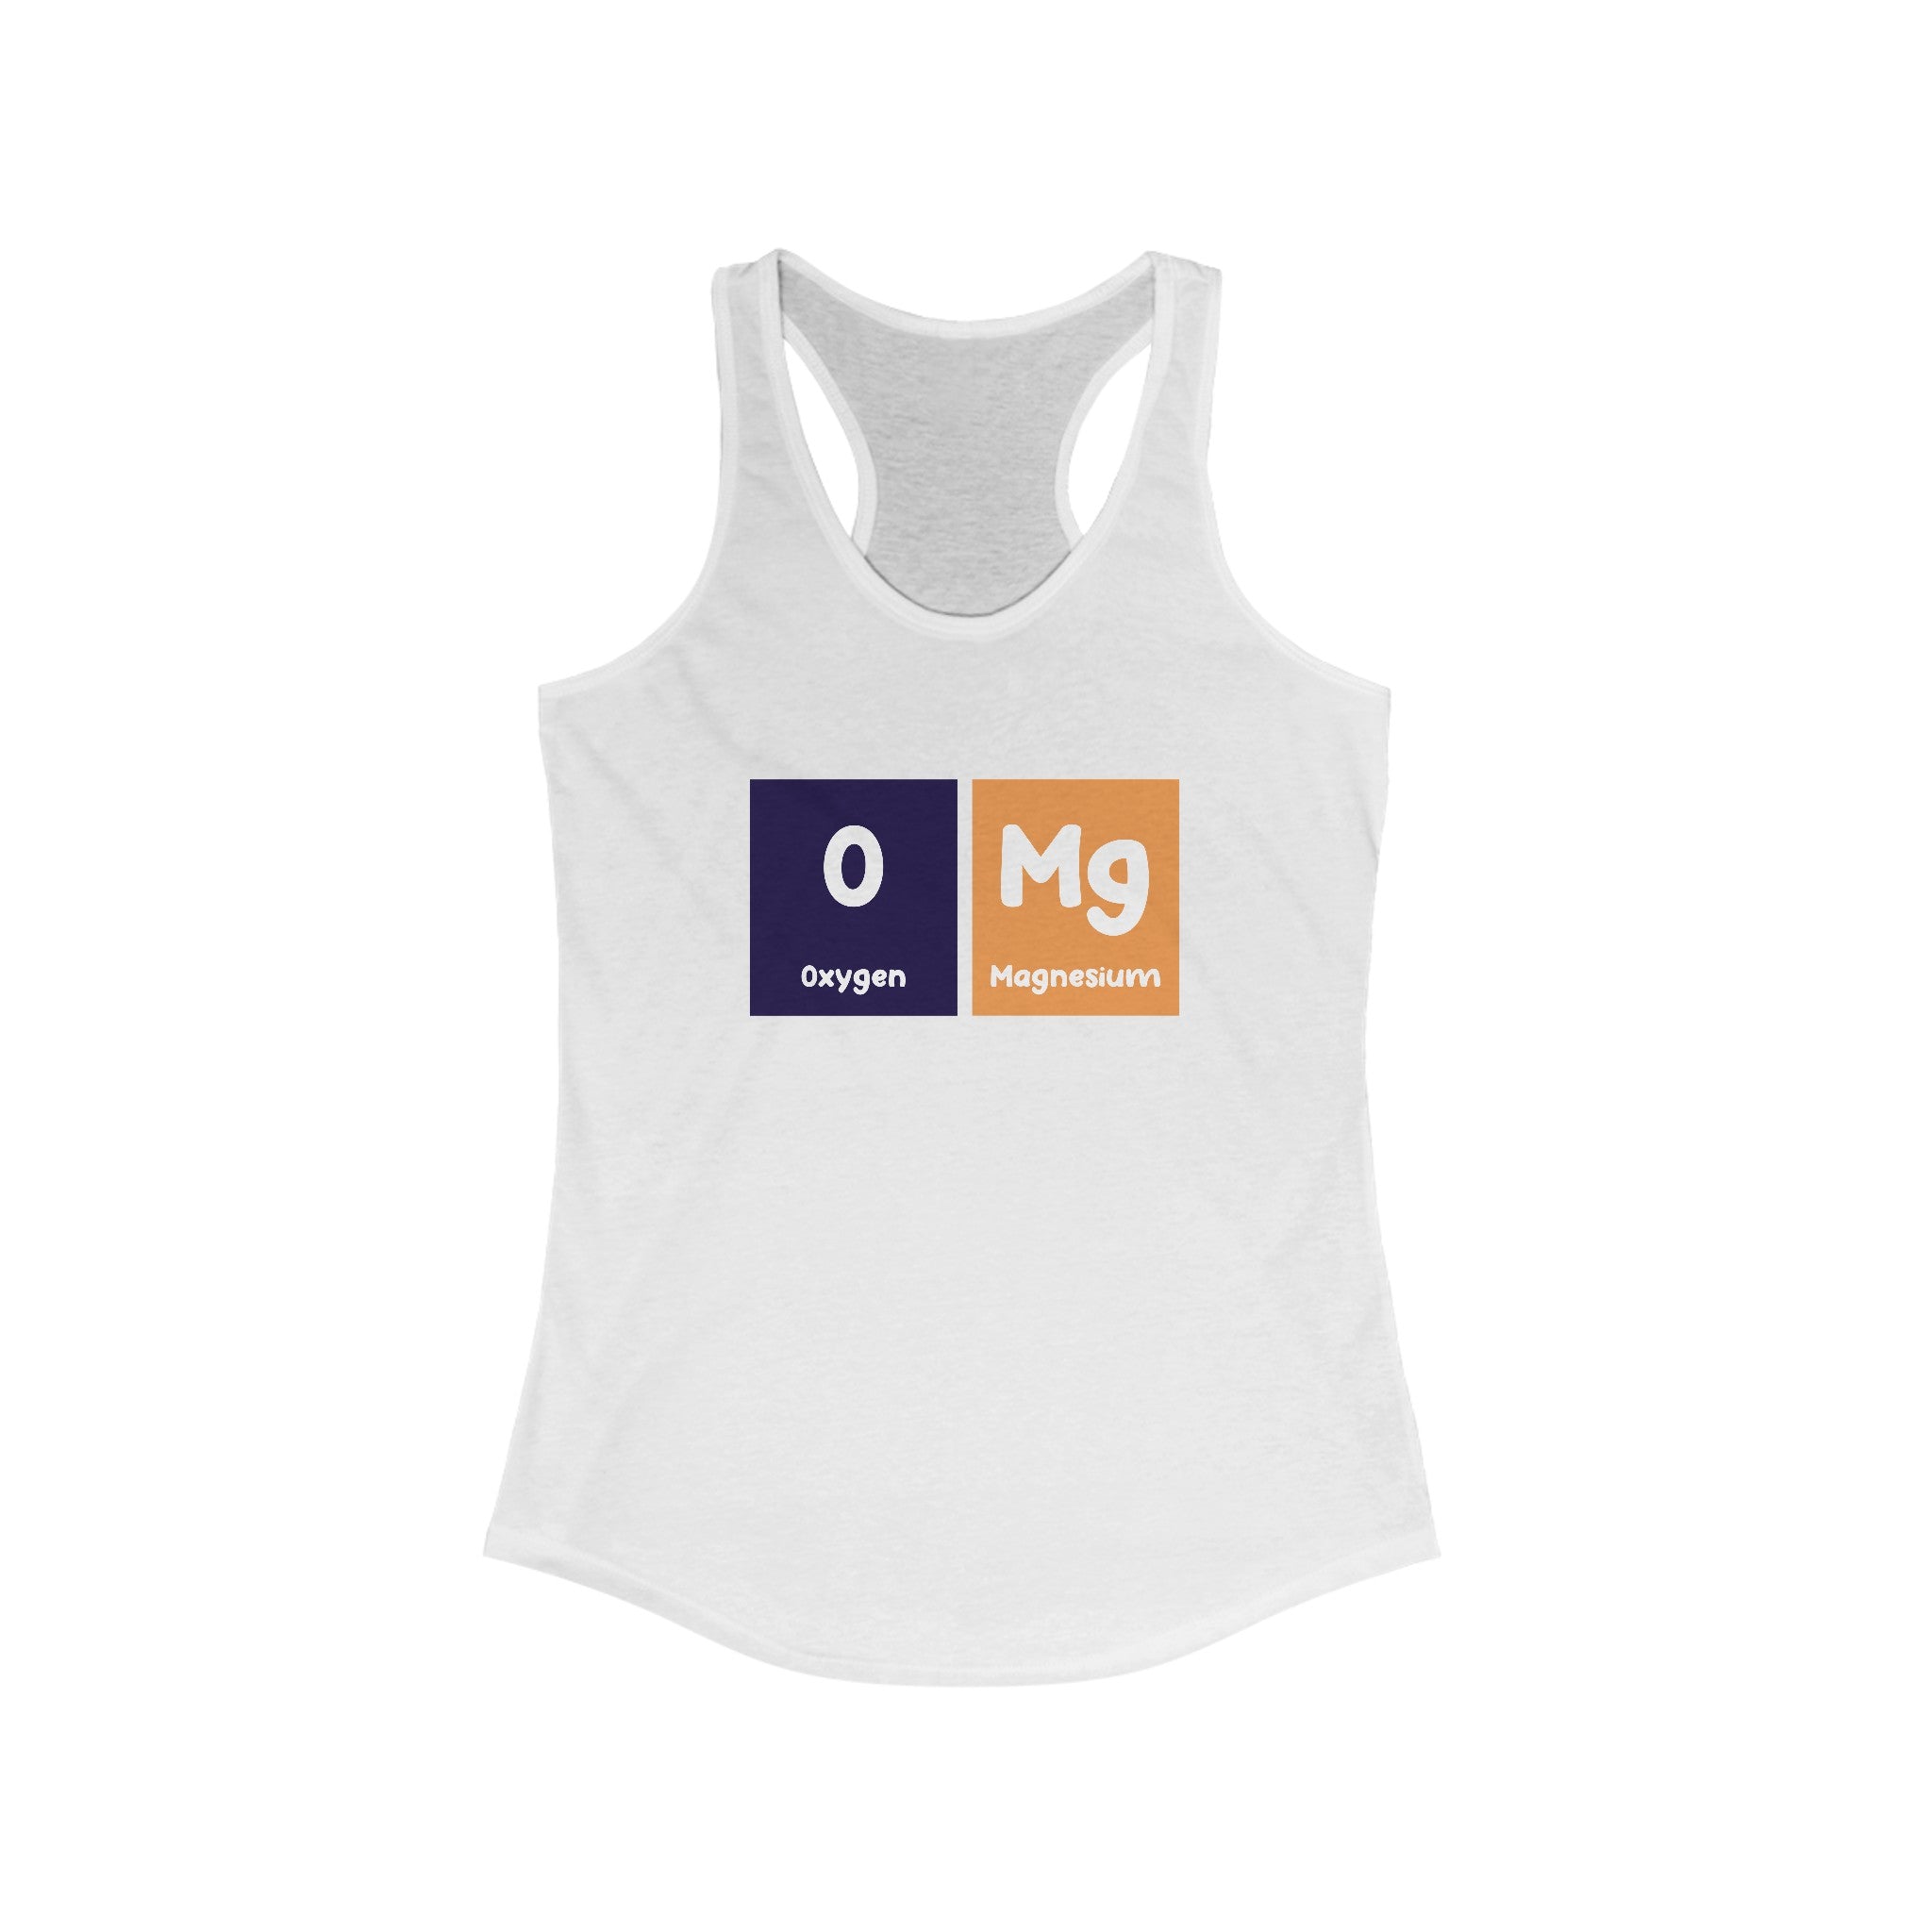 This O-Mg - Women's Racerback Tank in white showcases the periodic table elements Oxygen (O) and Magnesium (Mg) with their symbols and names displayed, blending style and comfort for an active lifestyle.